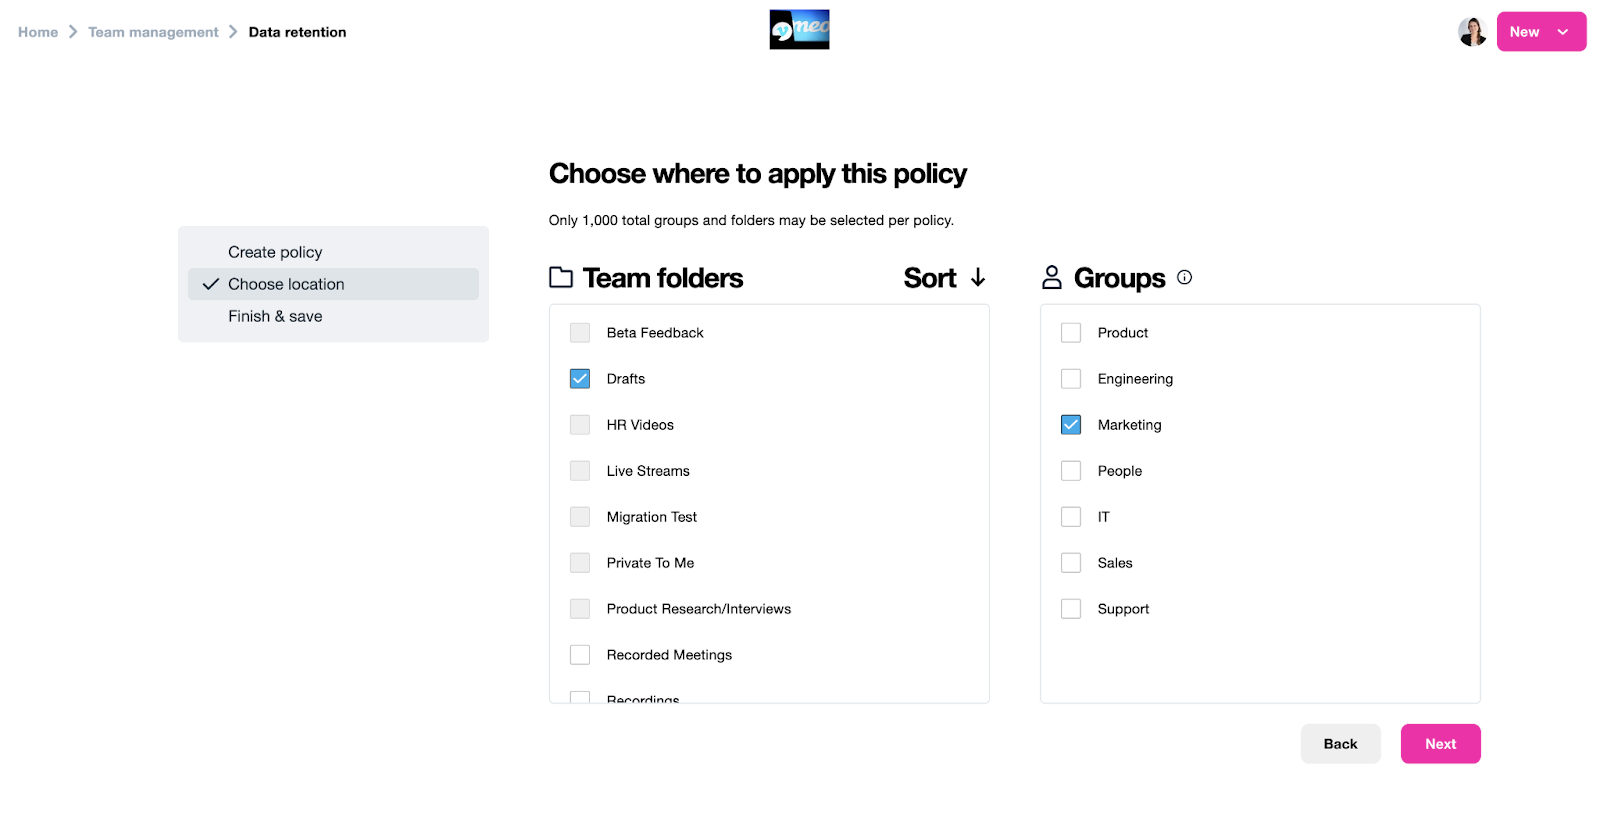 A screenshot of the 'Data retention' creation page. This shows the second step - 'Choose location'. This is where you can apply the policy you created. There are two panels shown to the right of the page - Team folders and Groups with a checkbox next to each folder or group. Select the checkboxes to apply the folder or group. You can select 'Sort' at the top of each panel to sort the list. There is a message stating that only 1,000 totalg groups and folders may be selected per policy. Under the panels, on the right of the page, are two buttons: Back (to return to the Create Policy page) and Next (to advance to the Finish and Save screen).